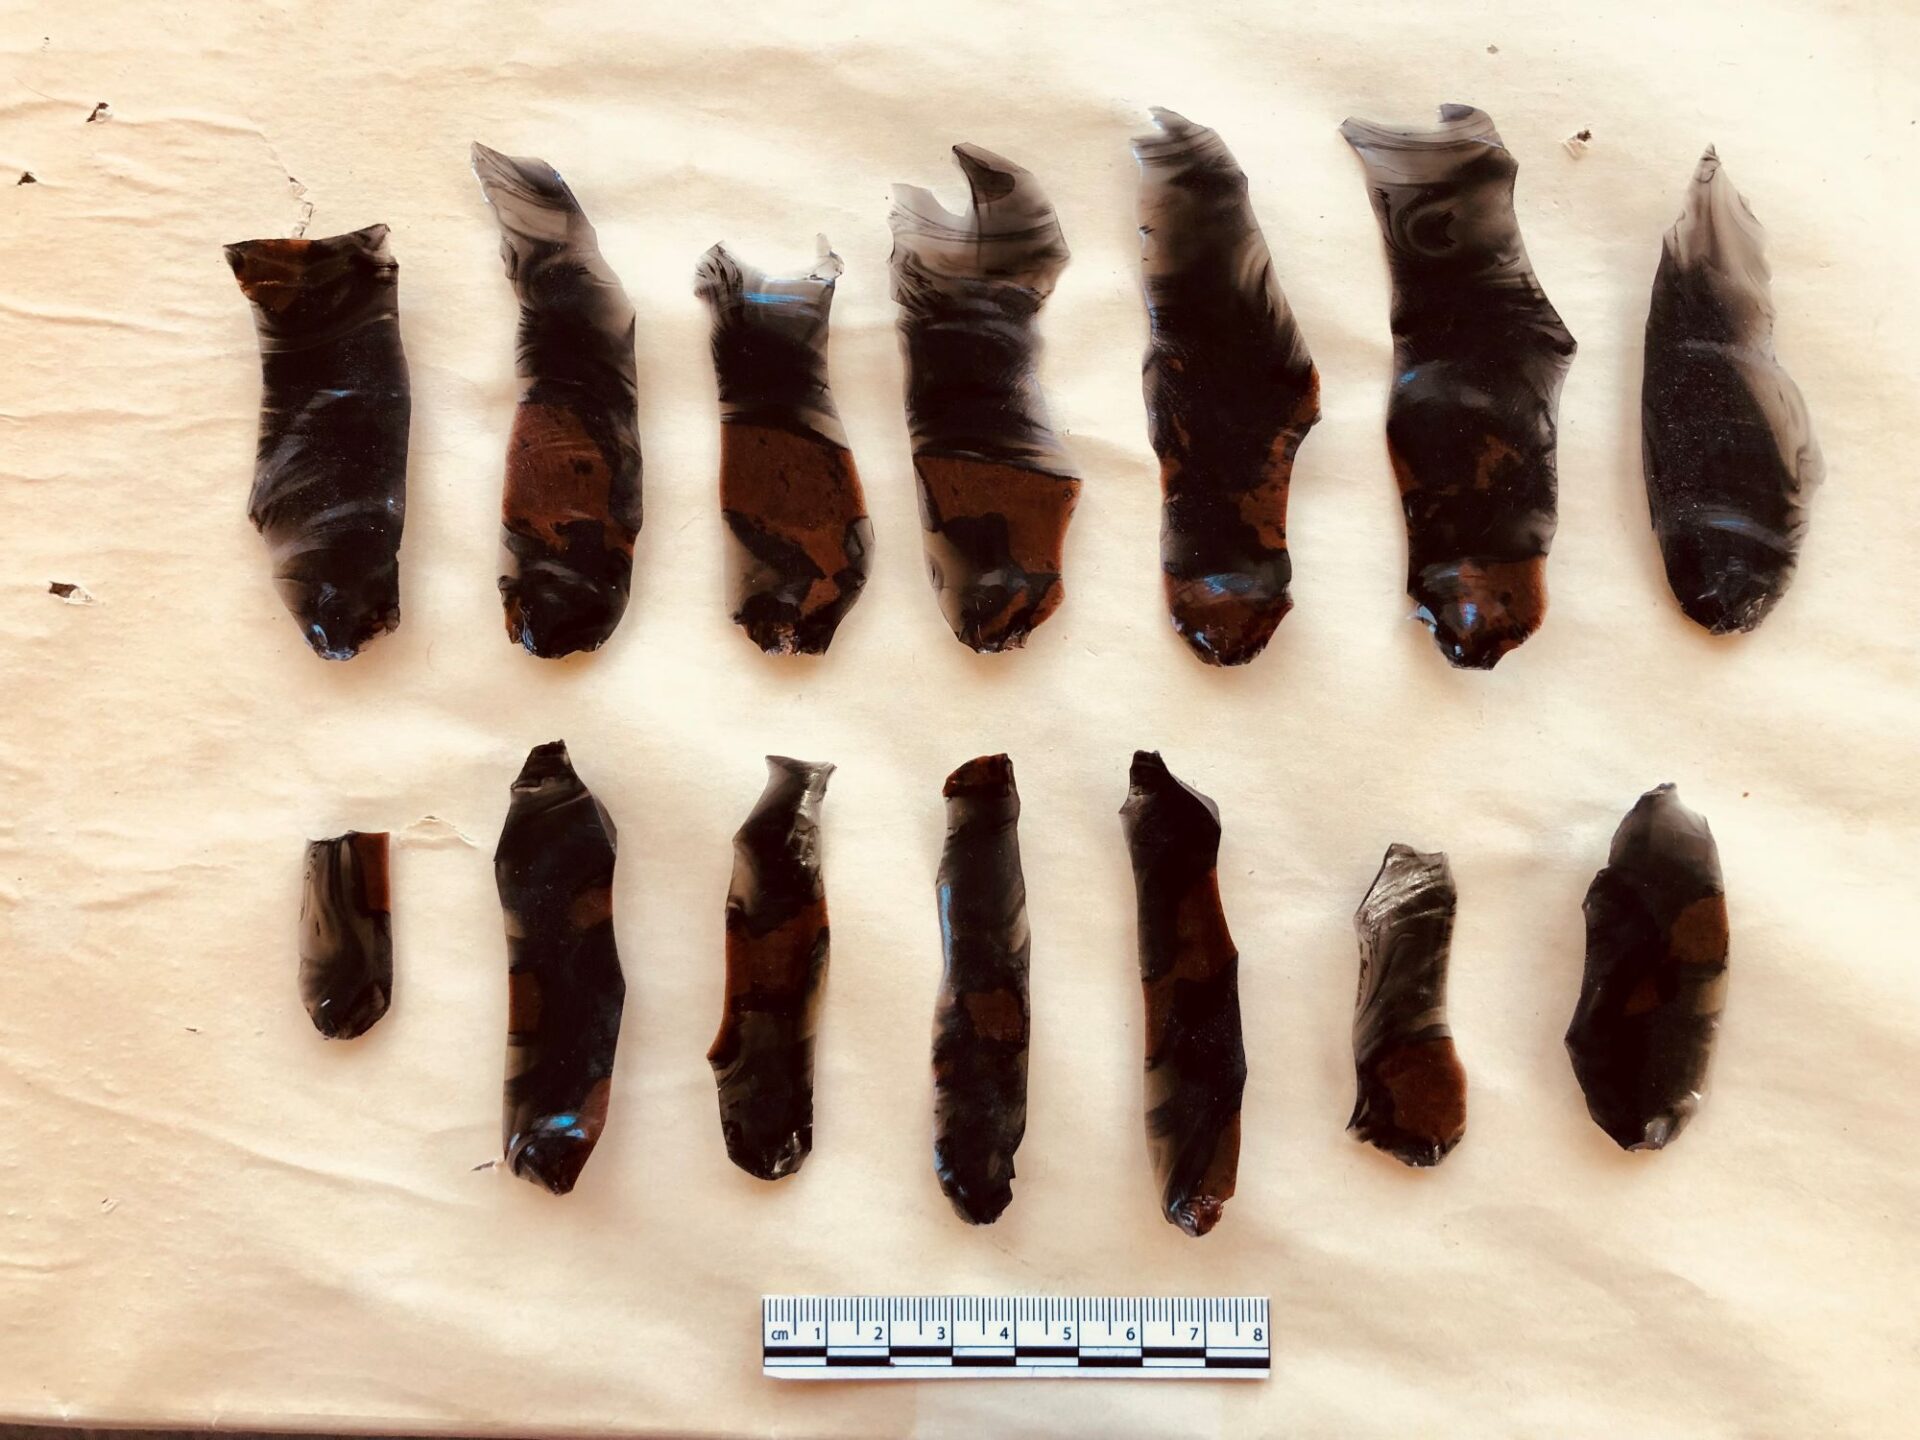 Here are the obsidian blades typical of macuahuitls. They were made through the flintknapping technique of indirect percussion, then snapped or flaked into rectangular segments.